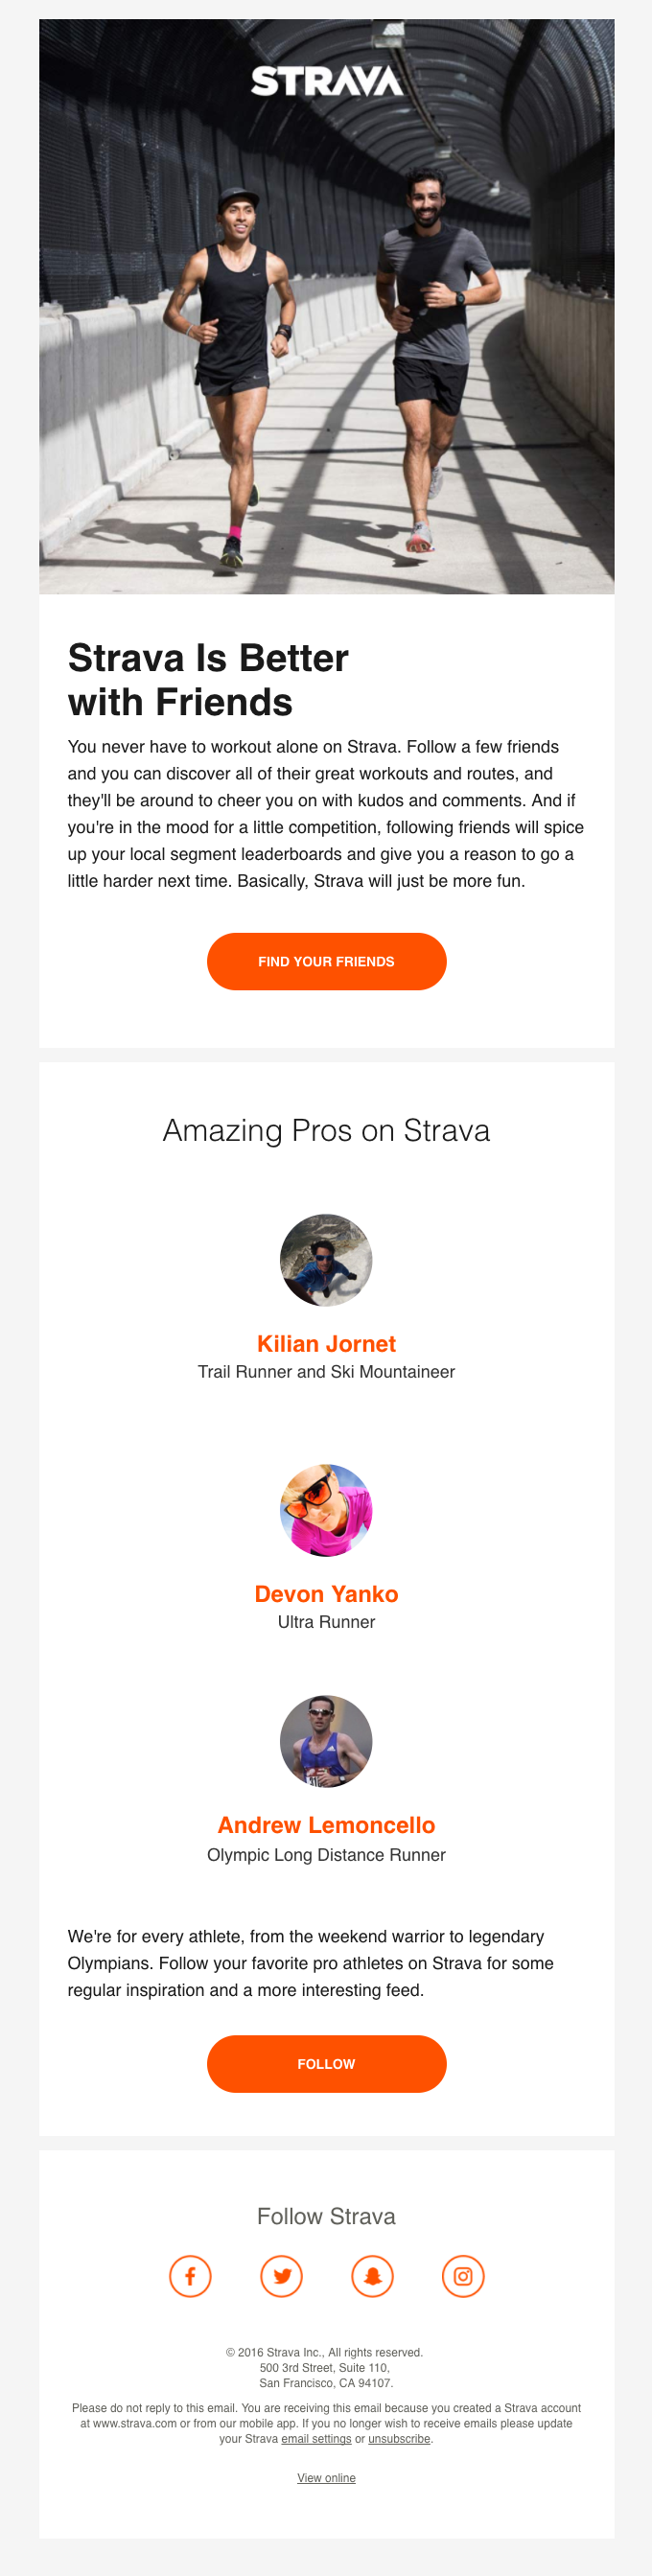 Your friends on Strava